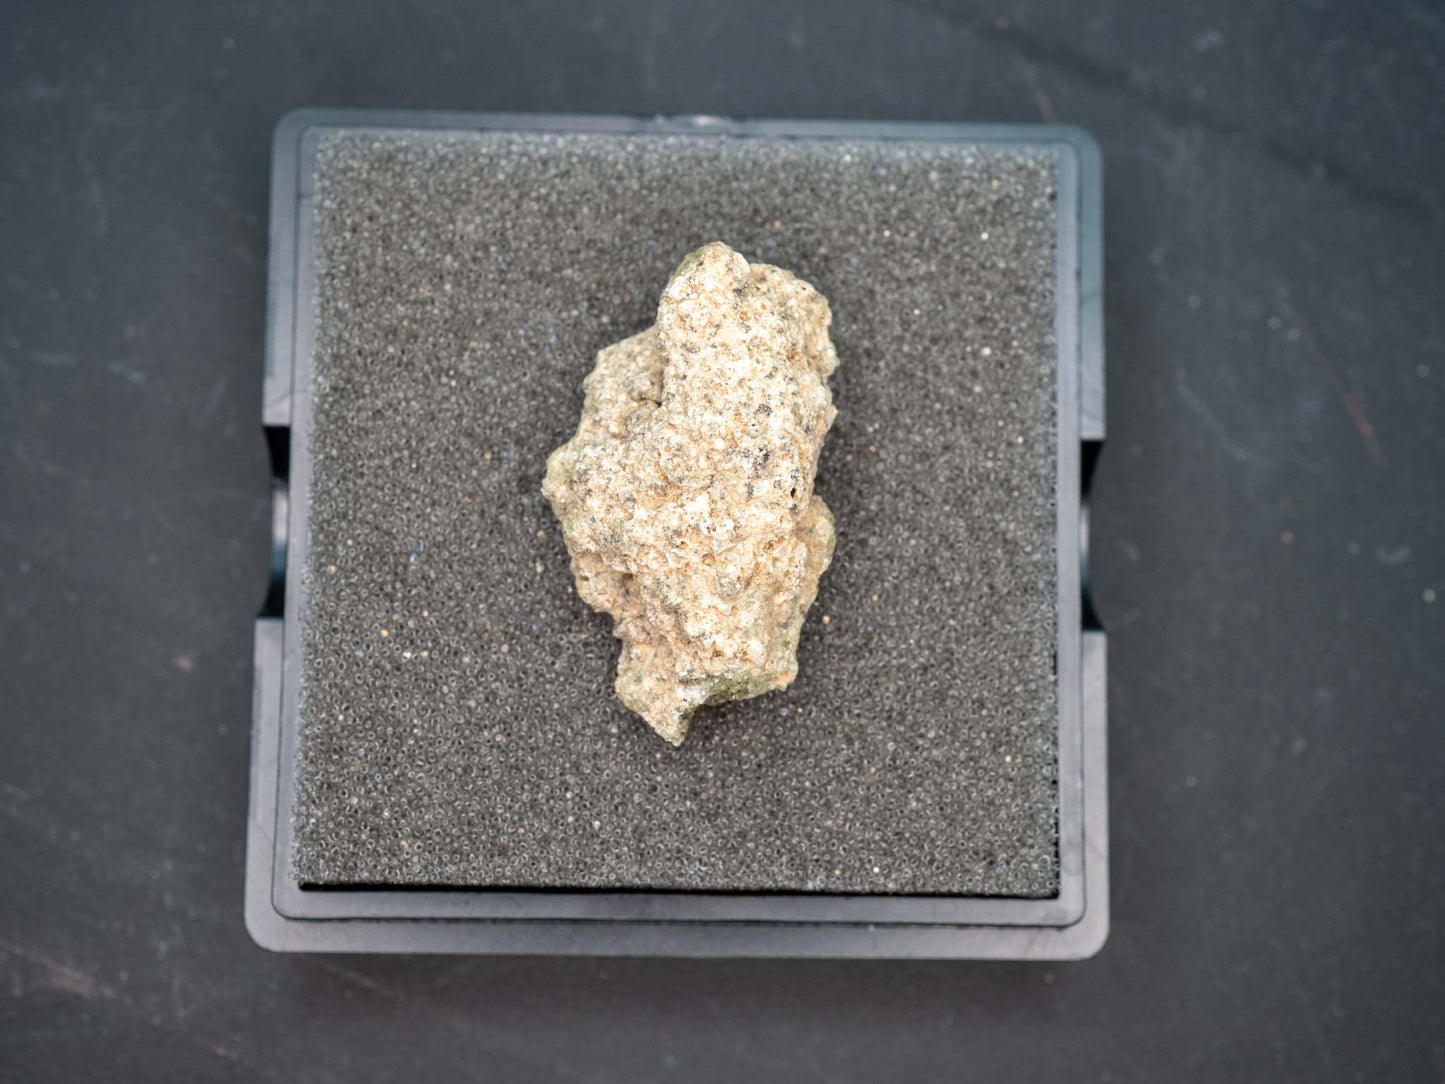 Trinitite (1.6 grams) - Trinity site, White Sands Missile Range, Socorro County, New Mexico, USA - July 16, 1945 at 5:29am MWT